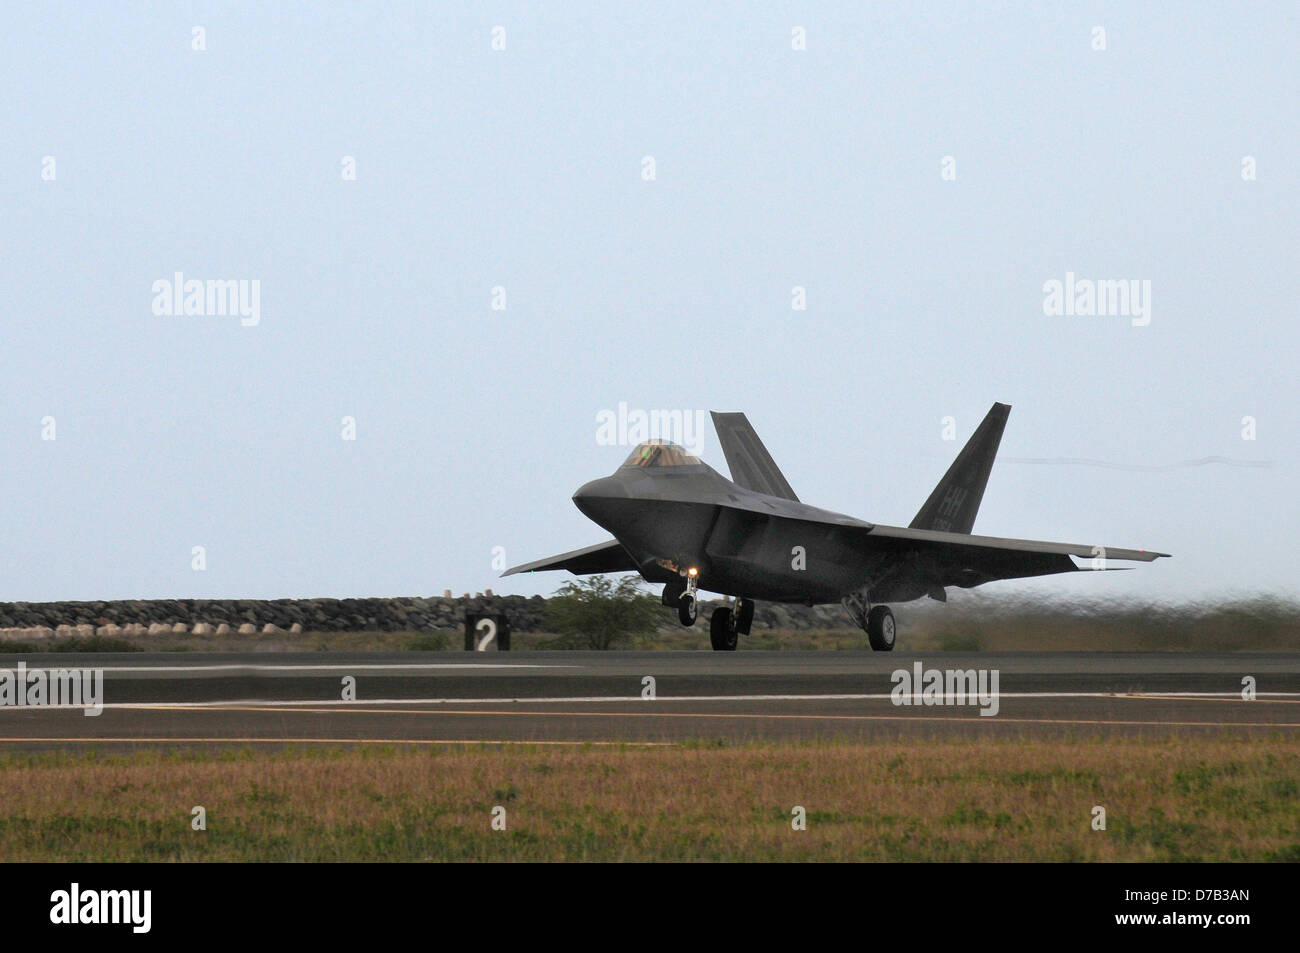 A US Air Force F-22 Raptor stealth fighter aircraft takes off April 6, 2013 at Joint Base Pearl Harbor-Hickam, Hawaii. Stock Photo